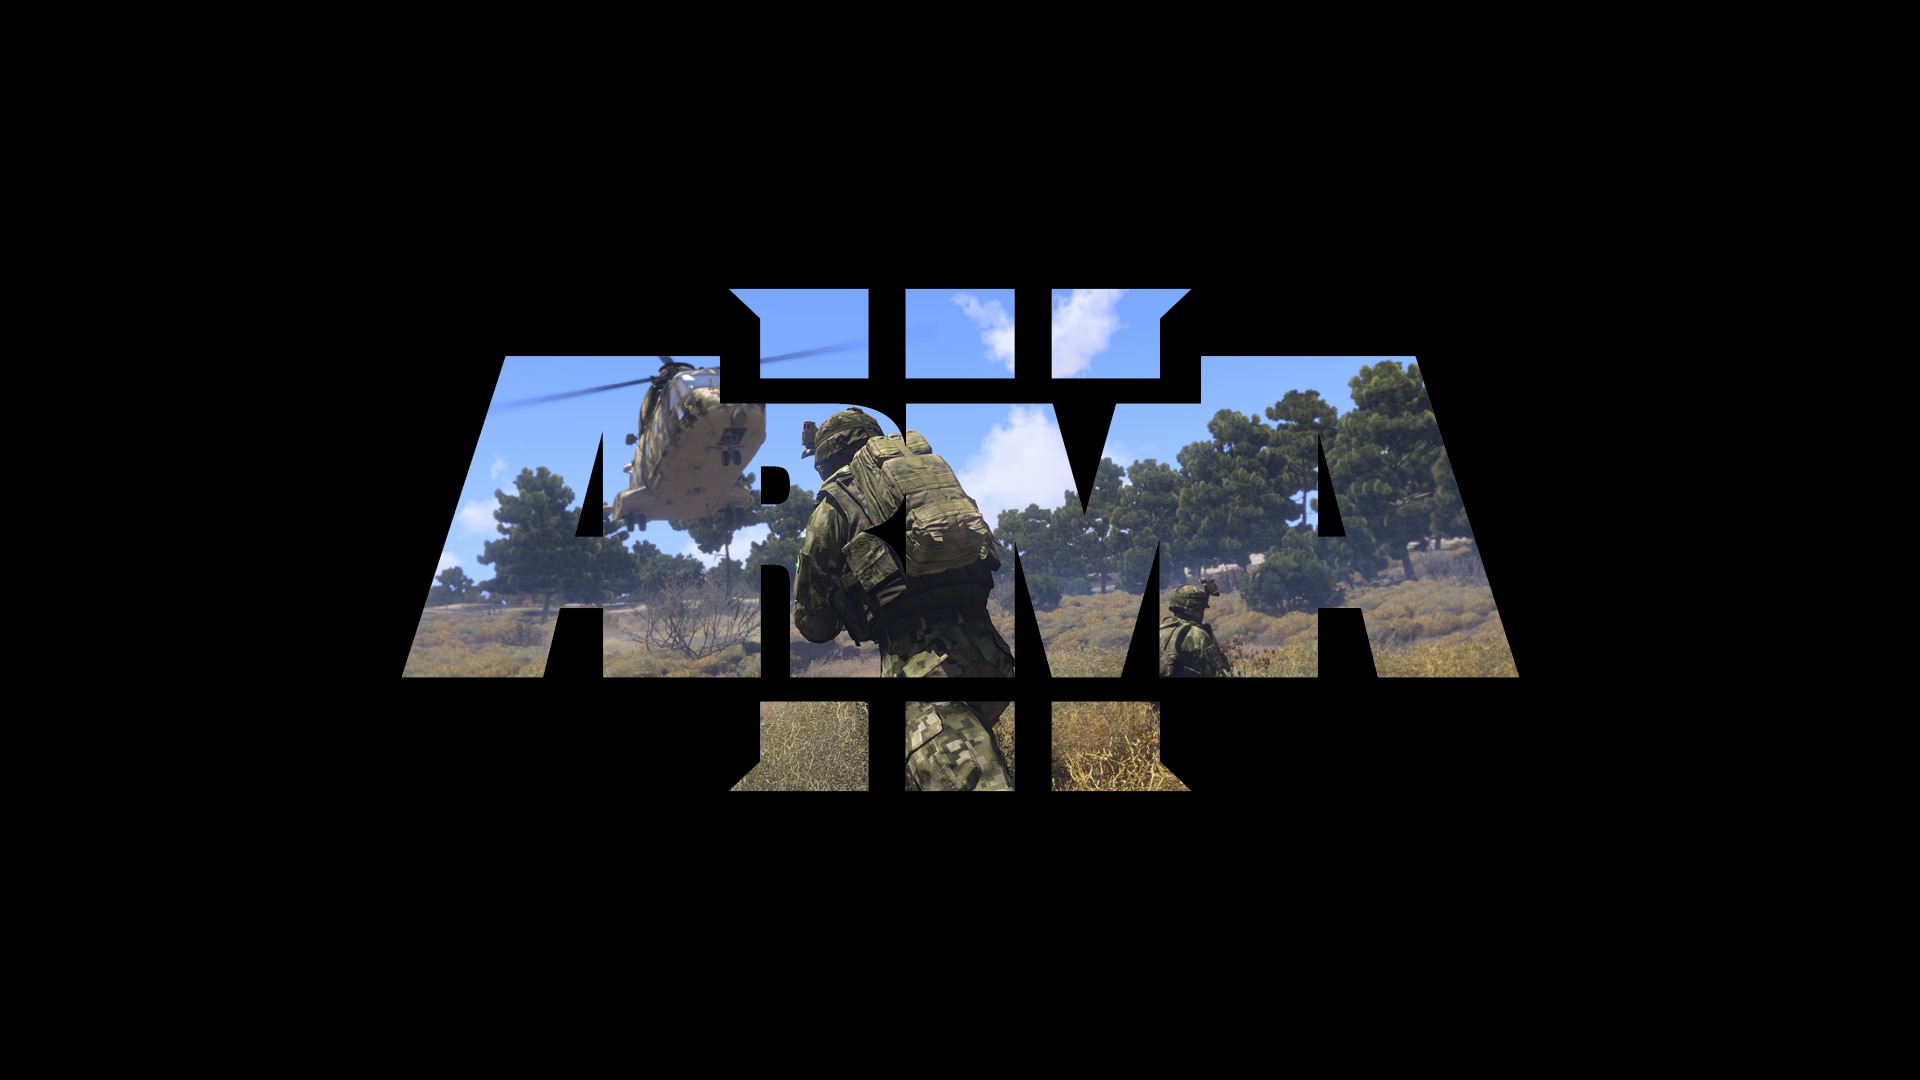 Mobile Weapons Project (Power Armor and More) - ARMA 3 - ADDONS & MODS:  DISCUSSION - Bohemia Interactive Forums